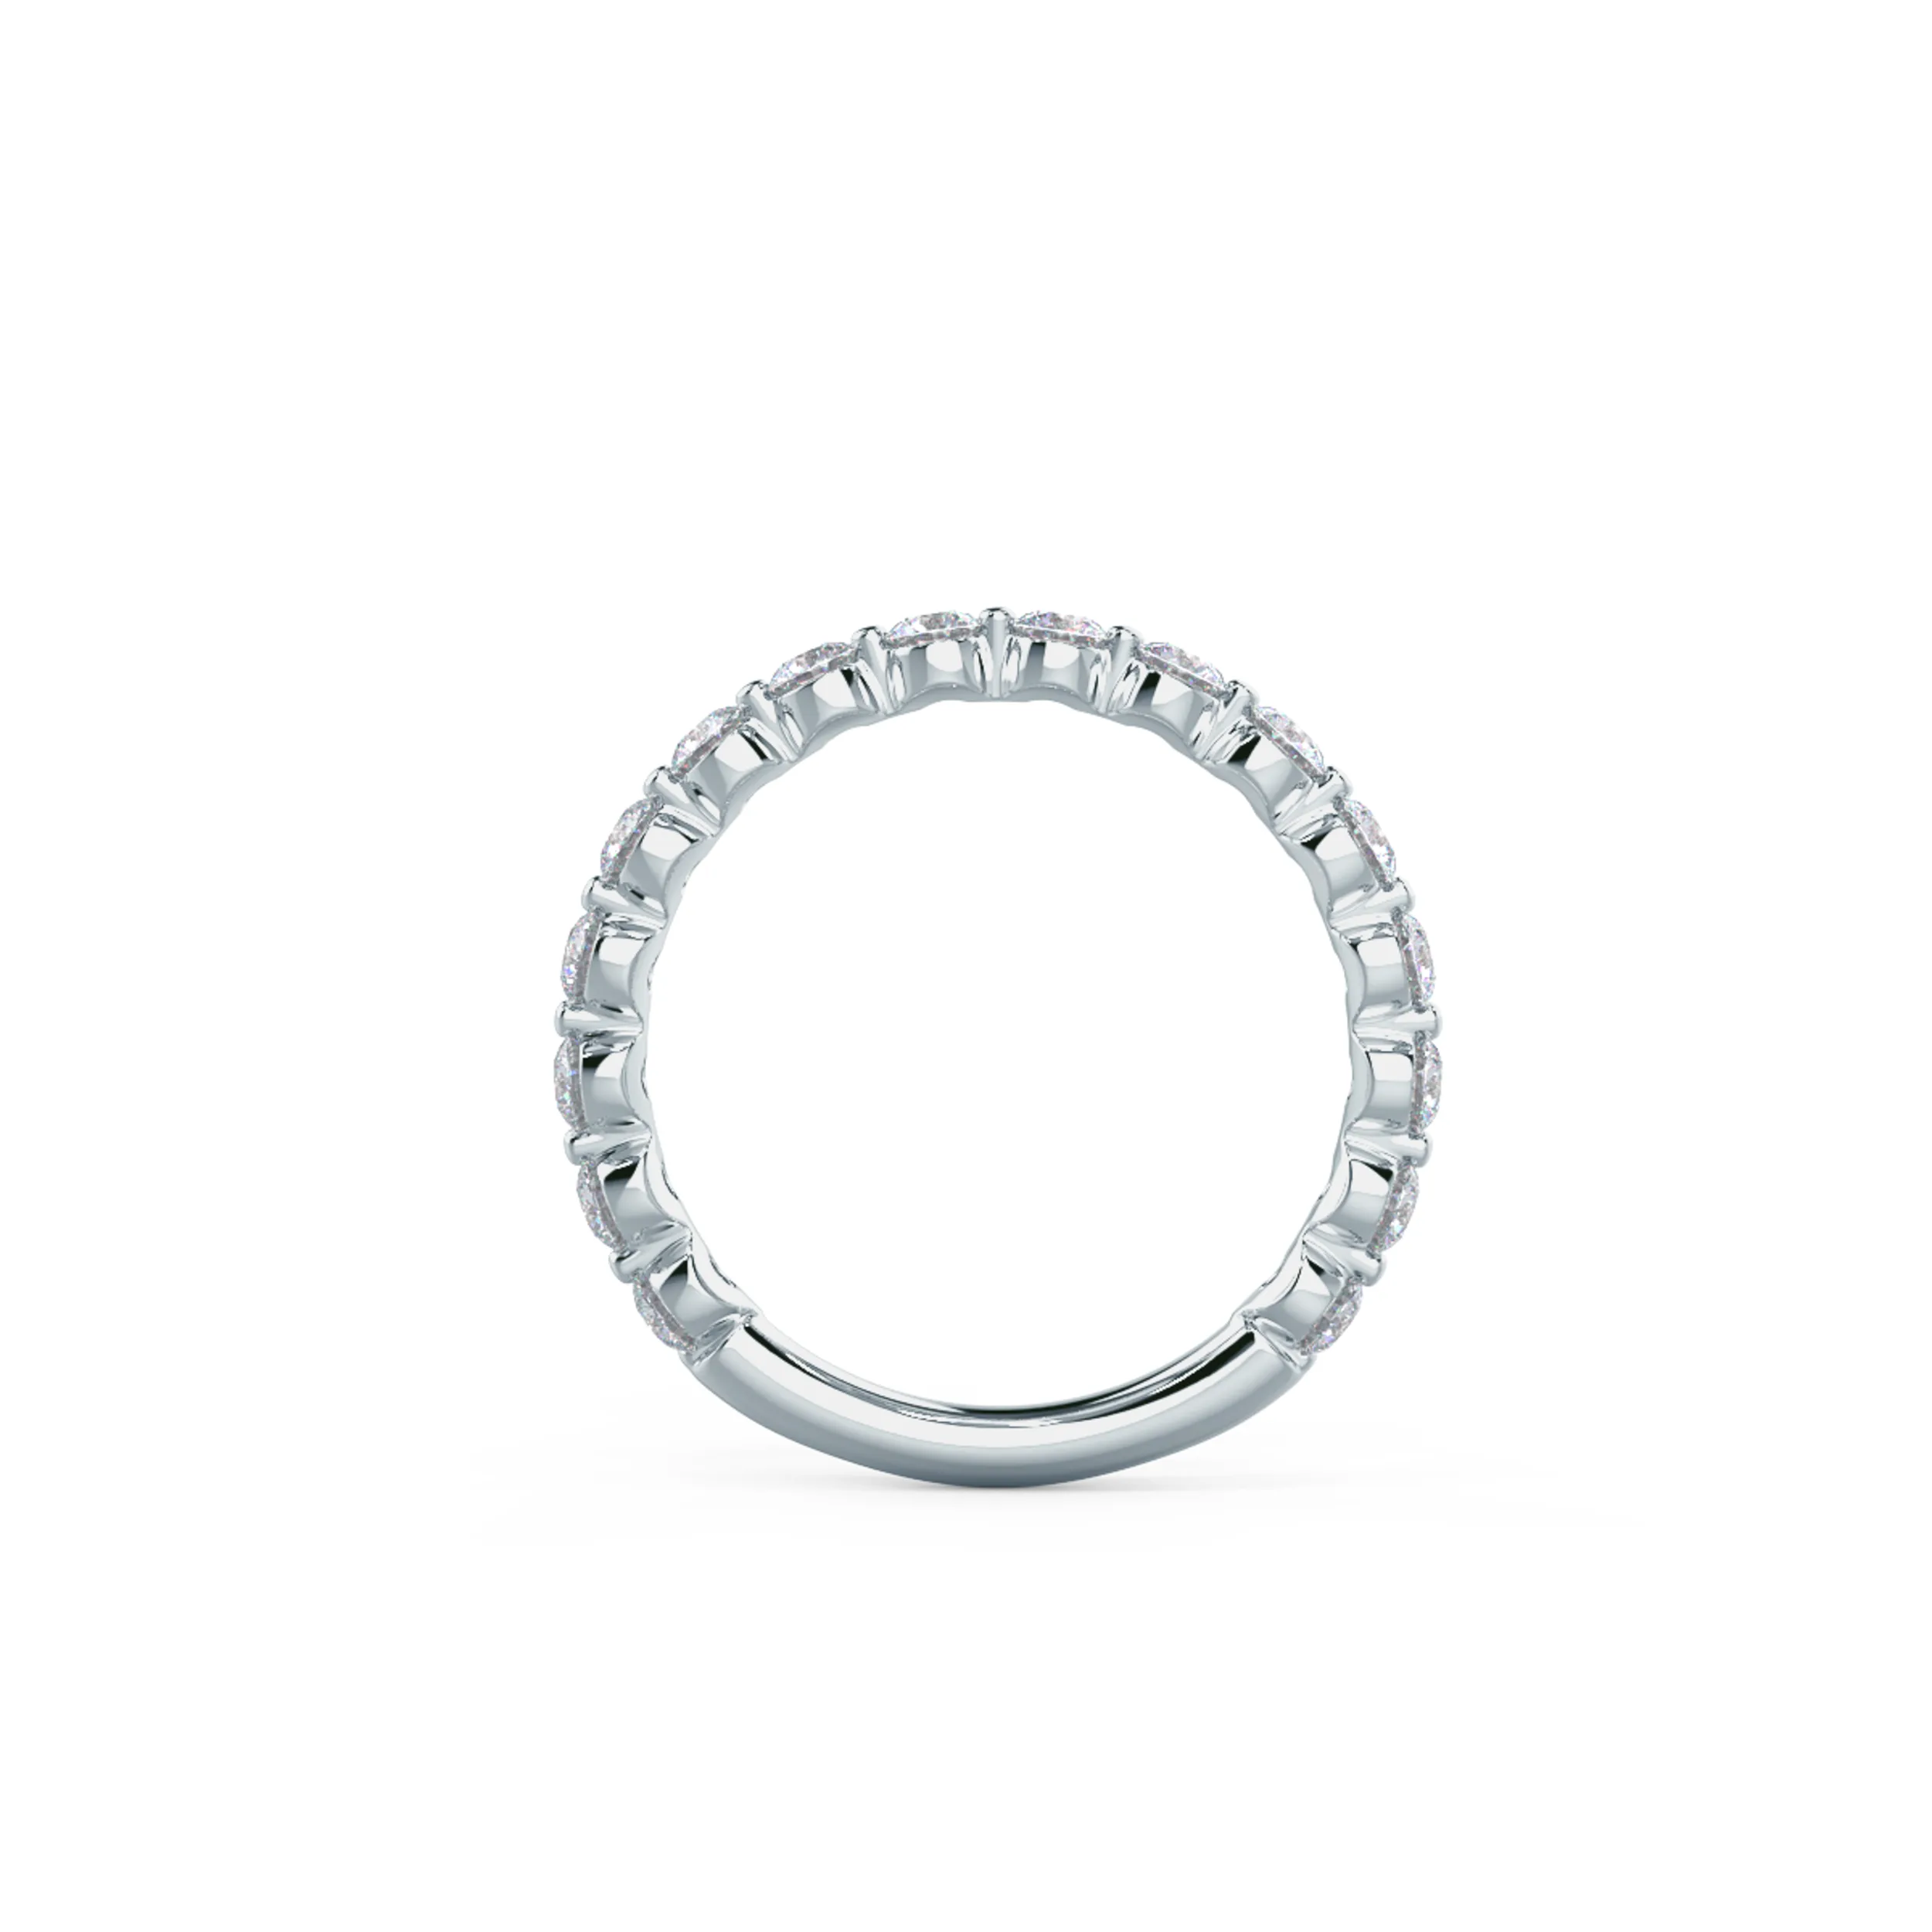 Exceptional Quality 0.8 ct Round Lab Diamonds Shared Prong Three Quarter Band in 18k White Gold (Profile View)